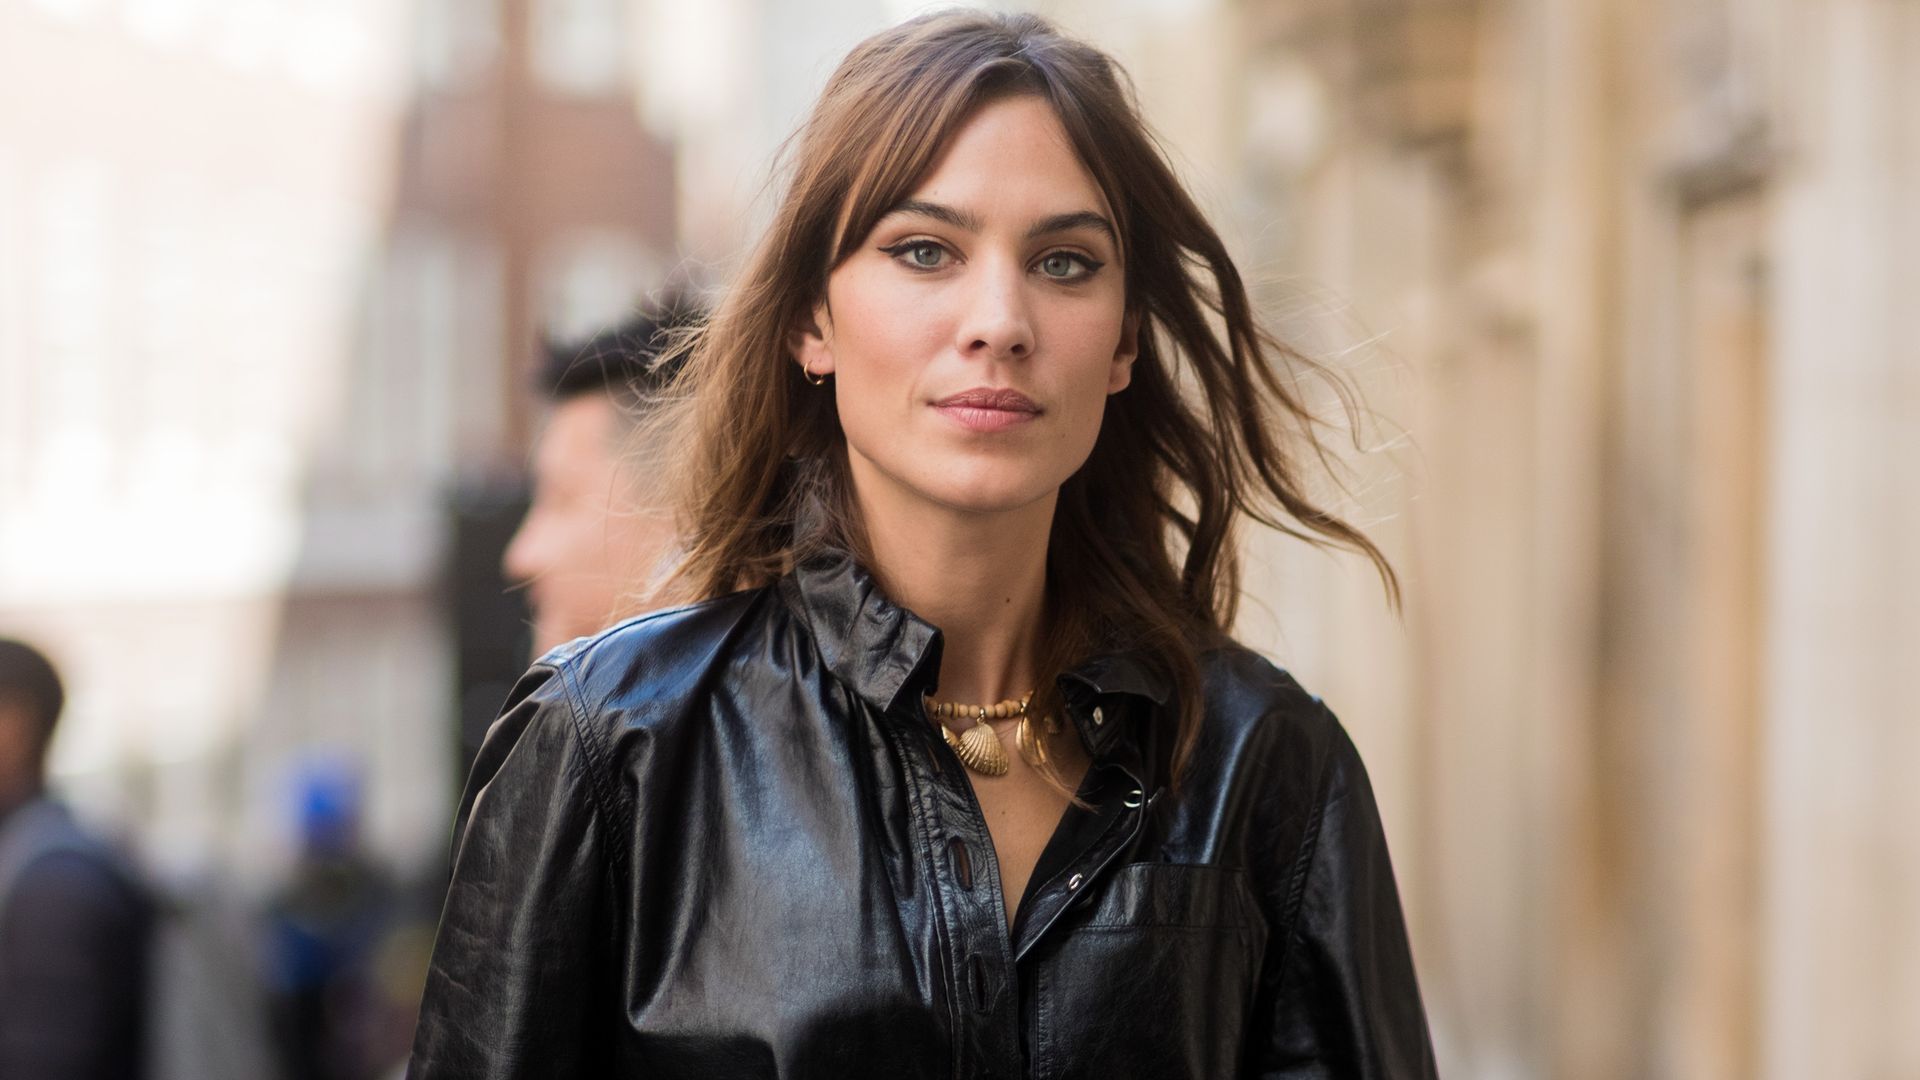 Alexa Chung's 'moving house outfit' is actually seriously chic